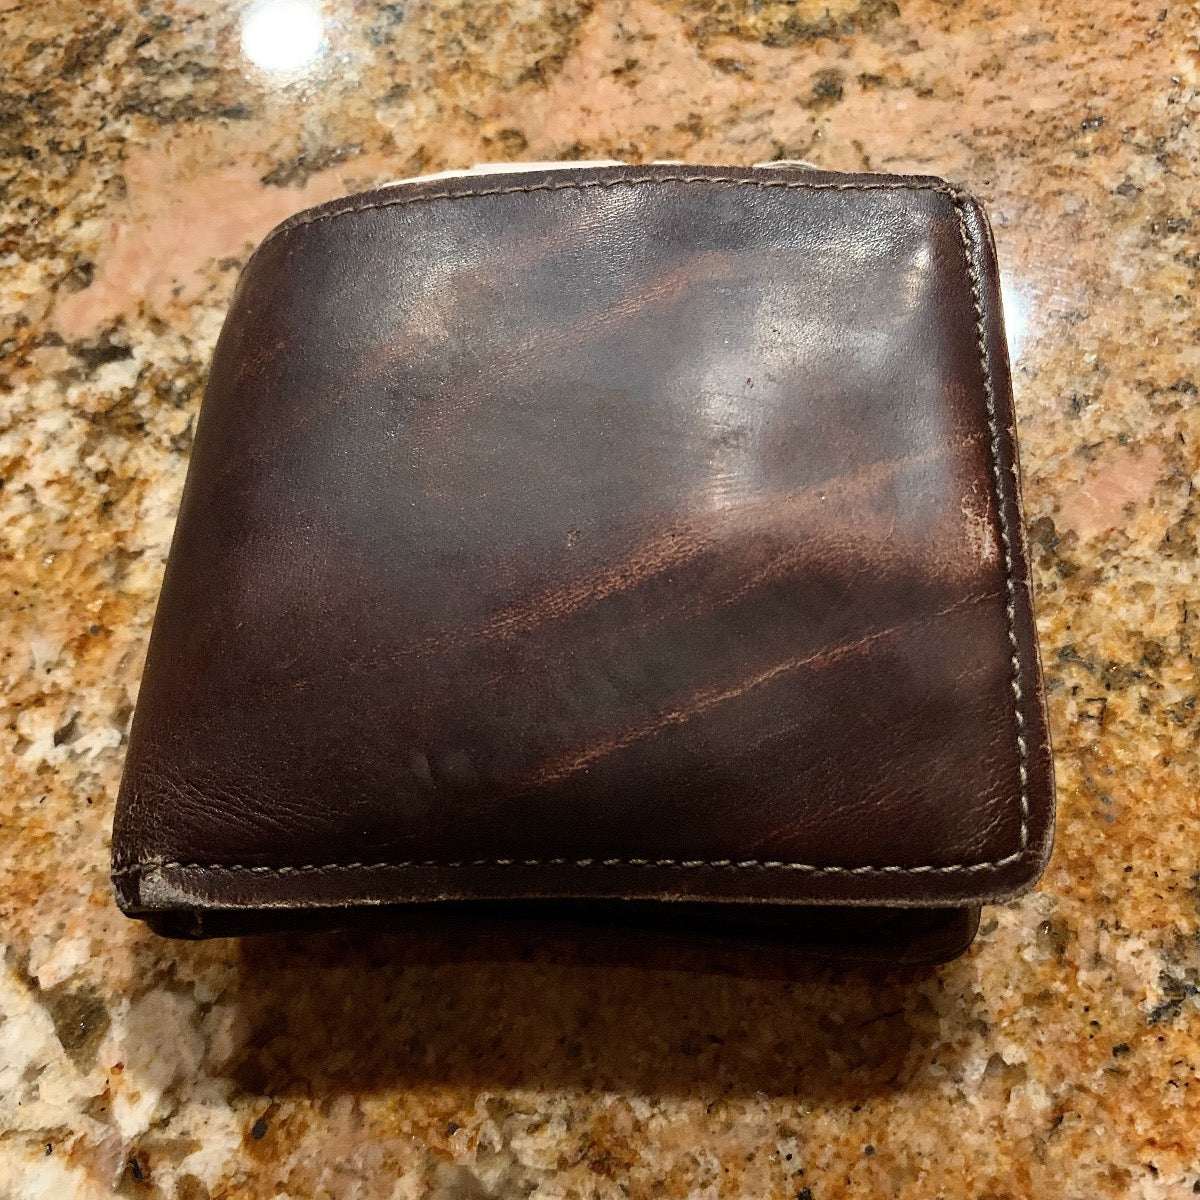 example: 8 year old wallet showing no signs of breakdown